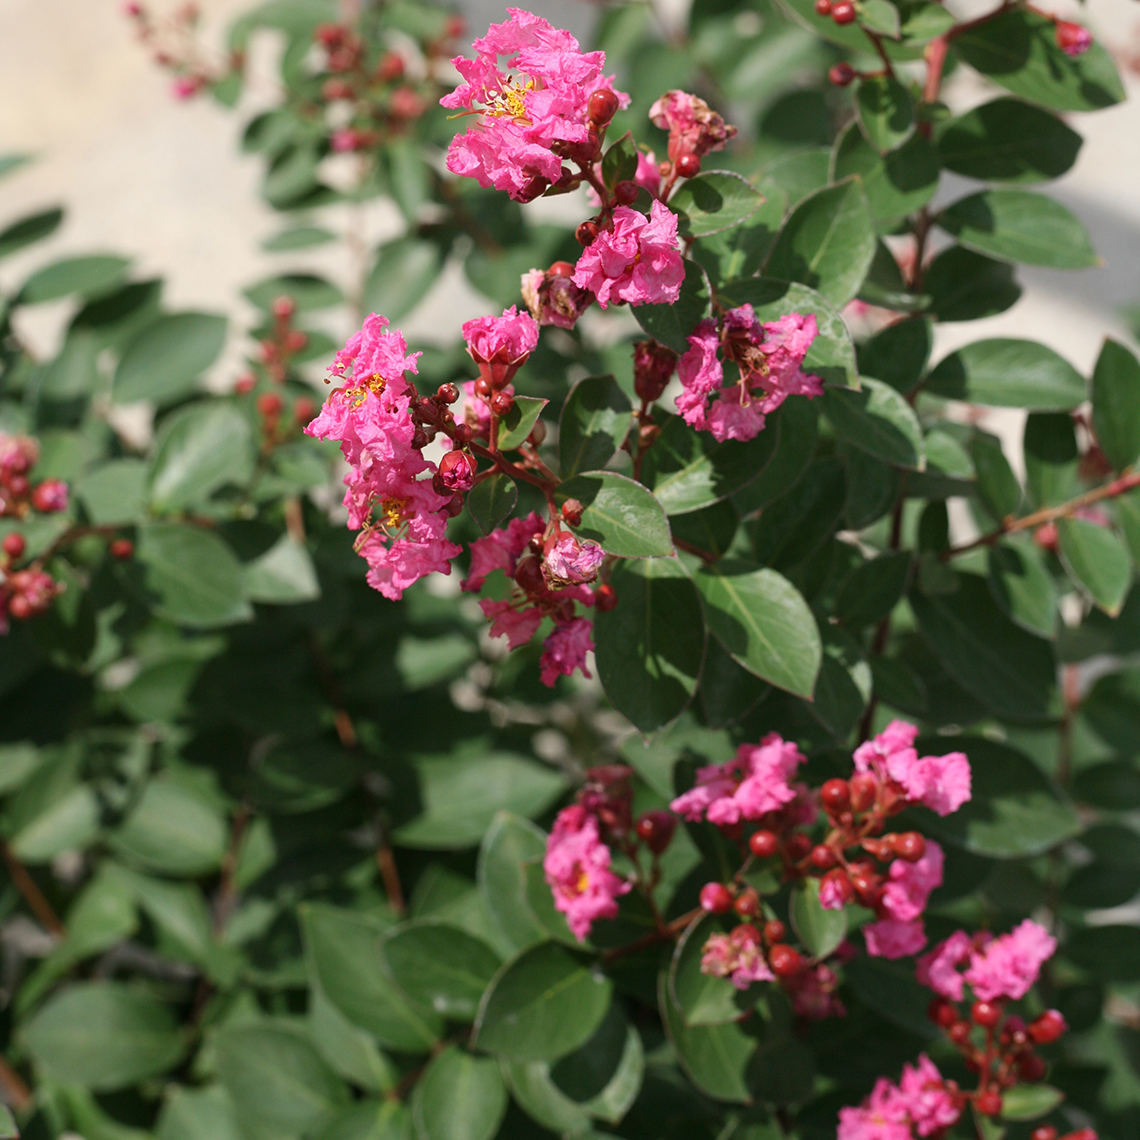 Close up of Infinitini Brite Pink Lagerstroemia blooms